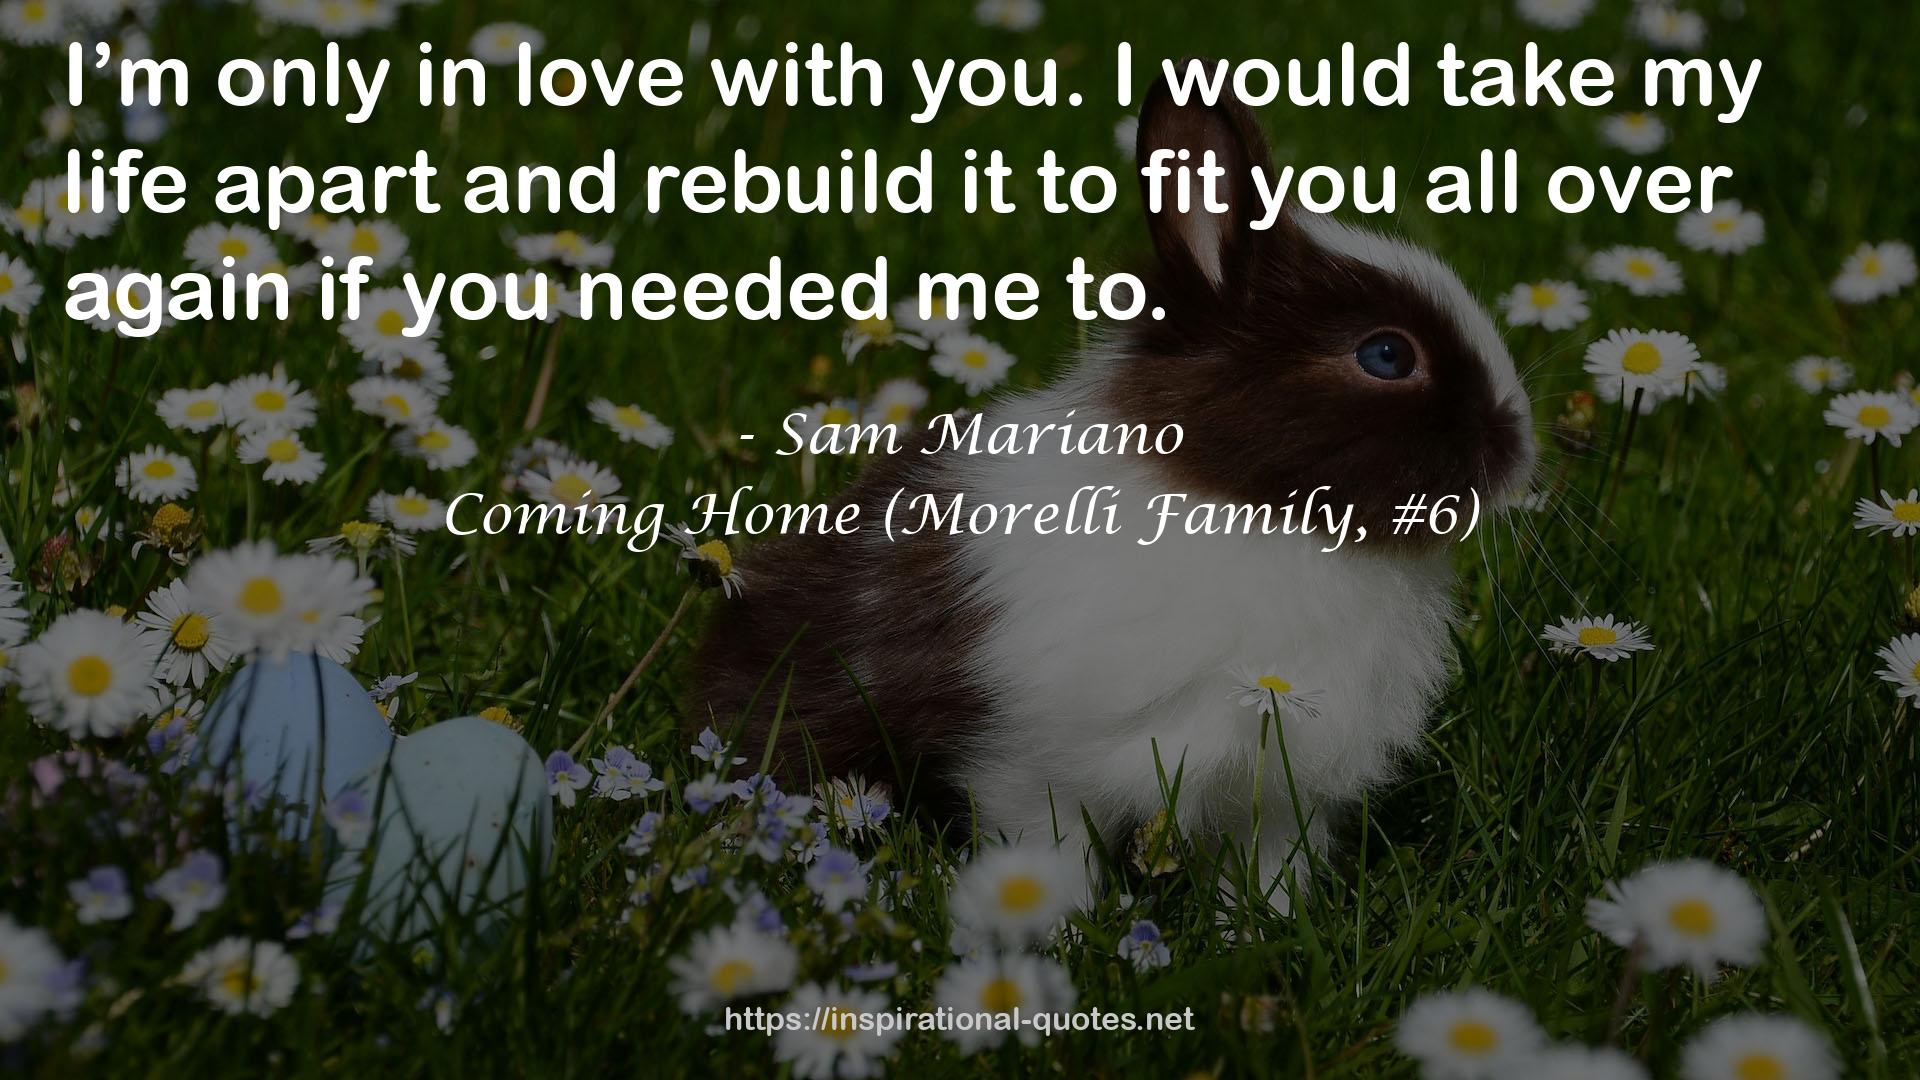 Coming Home (Morelli Family, #6) QUOTES